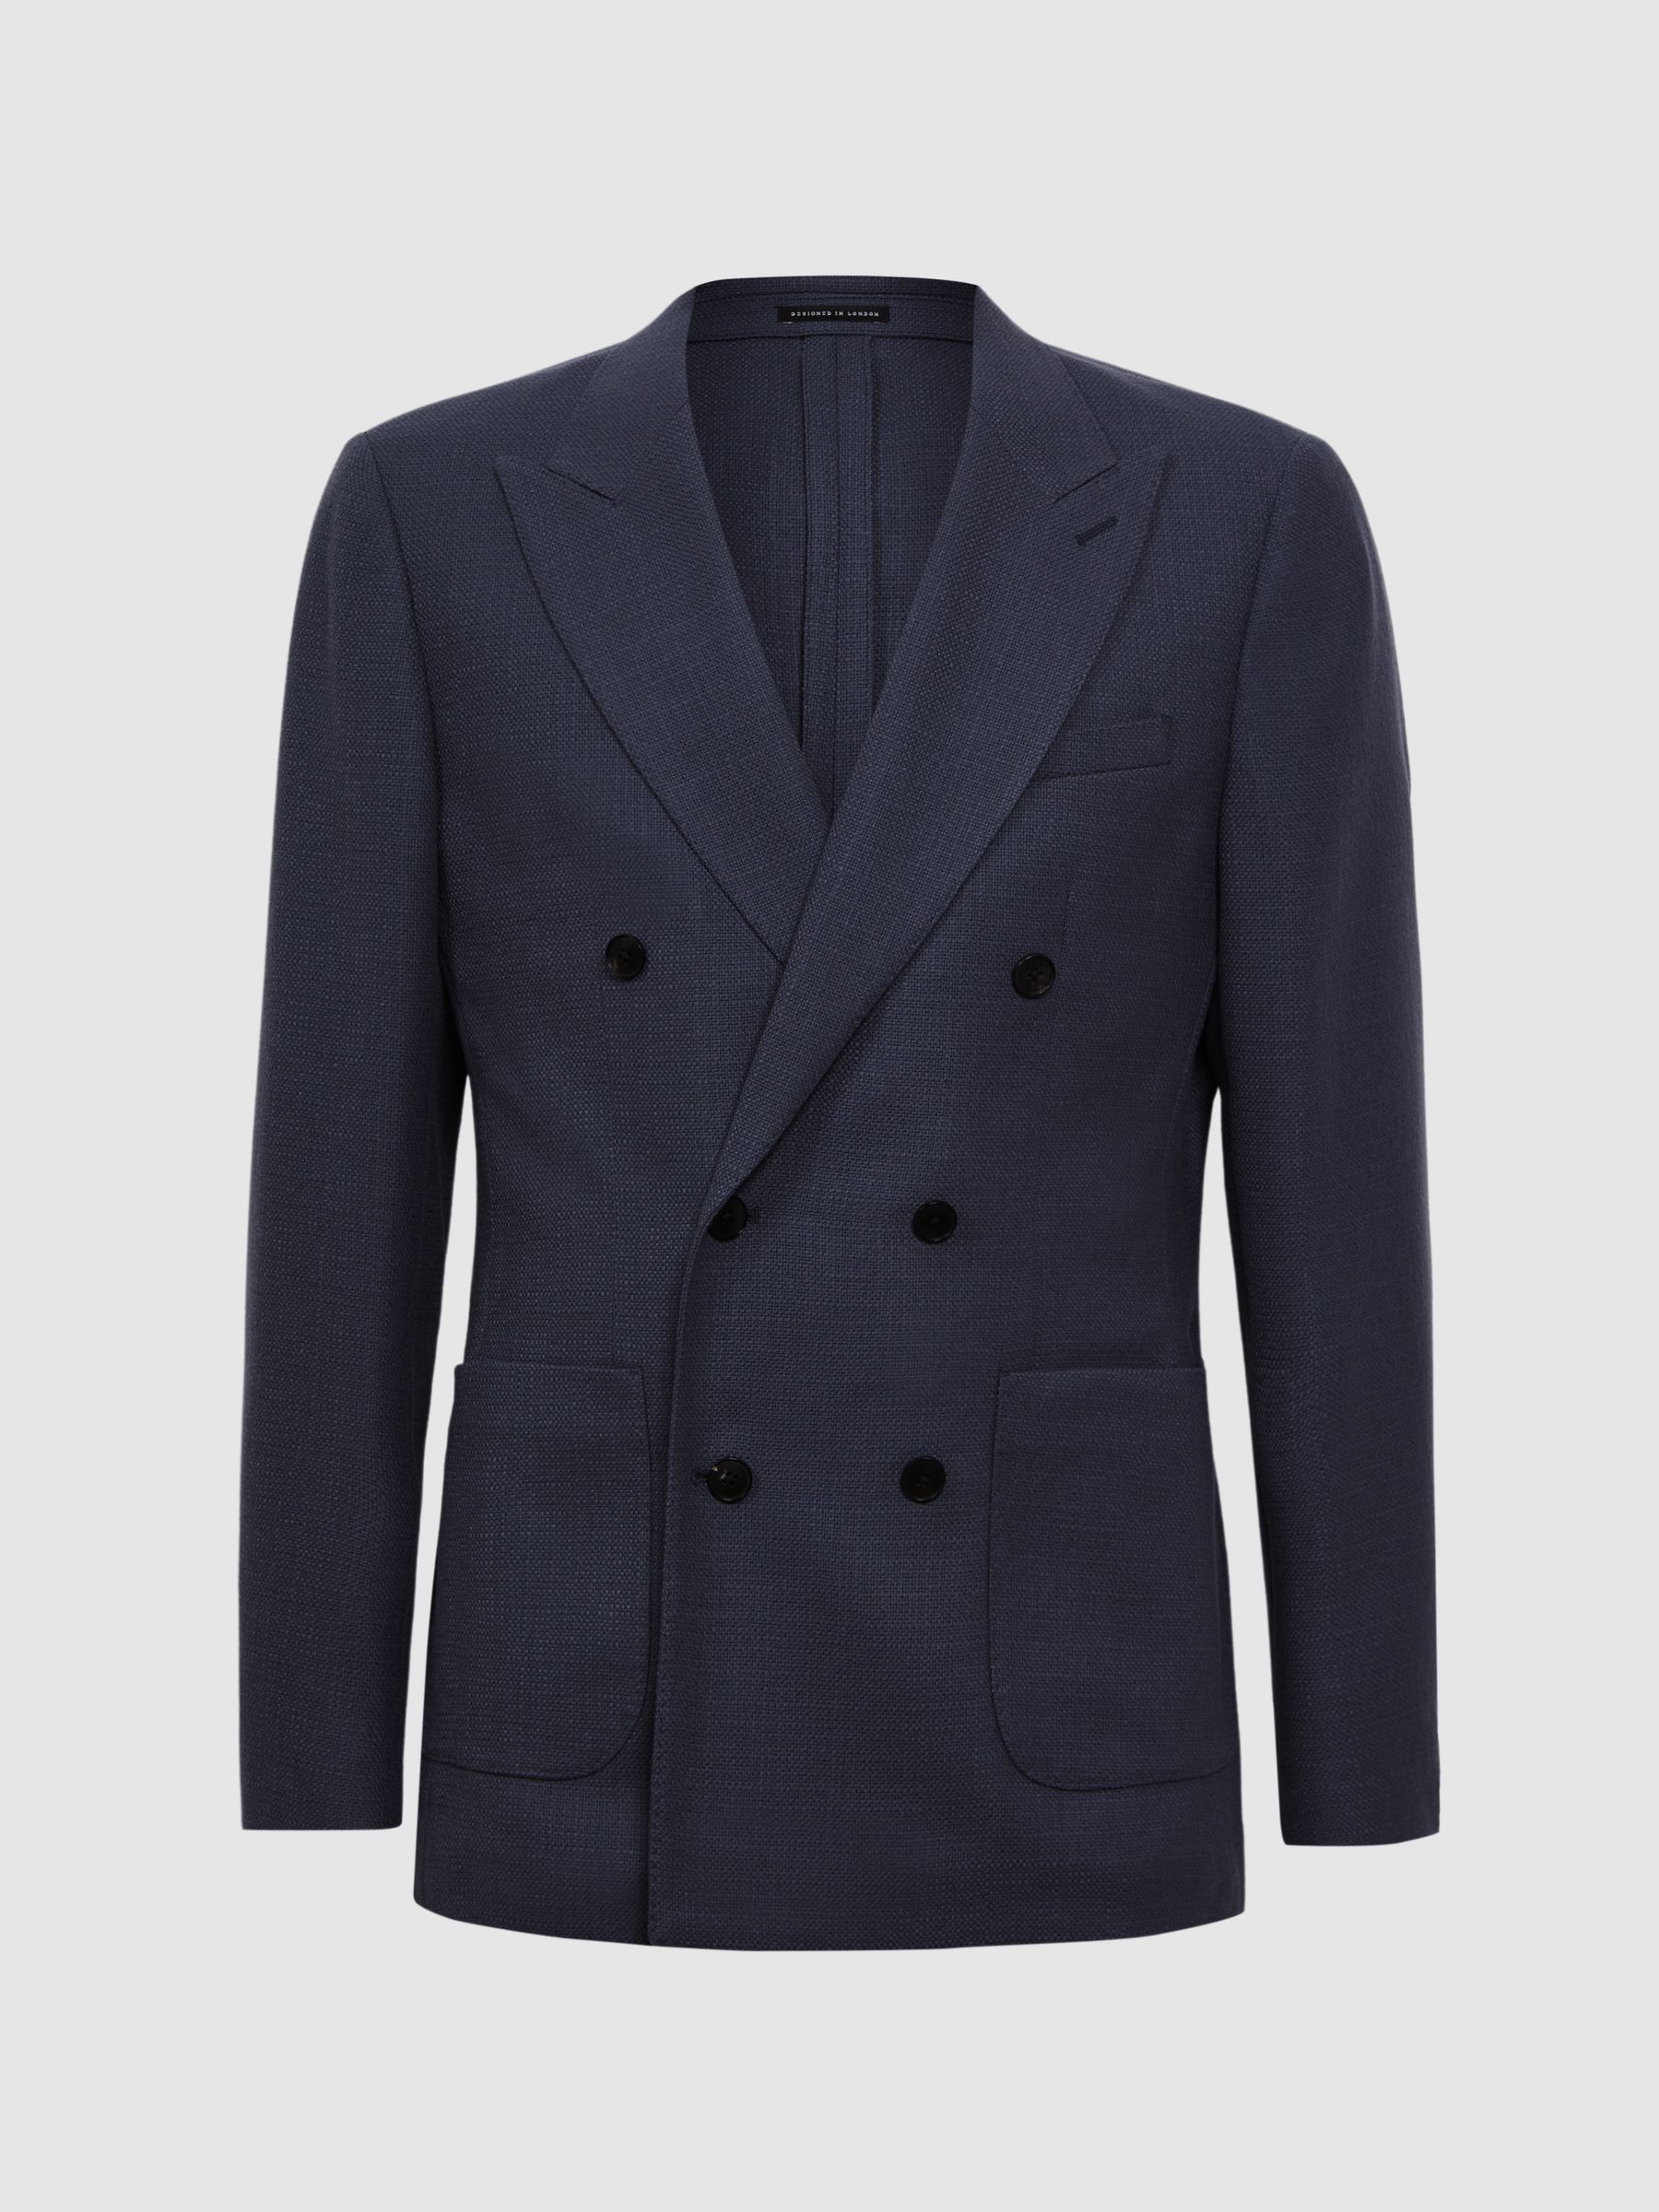 Reiss Admire Double Breasted Weave Blazer | REISS USA